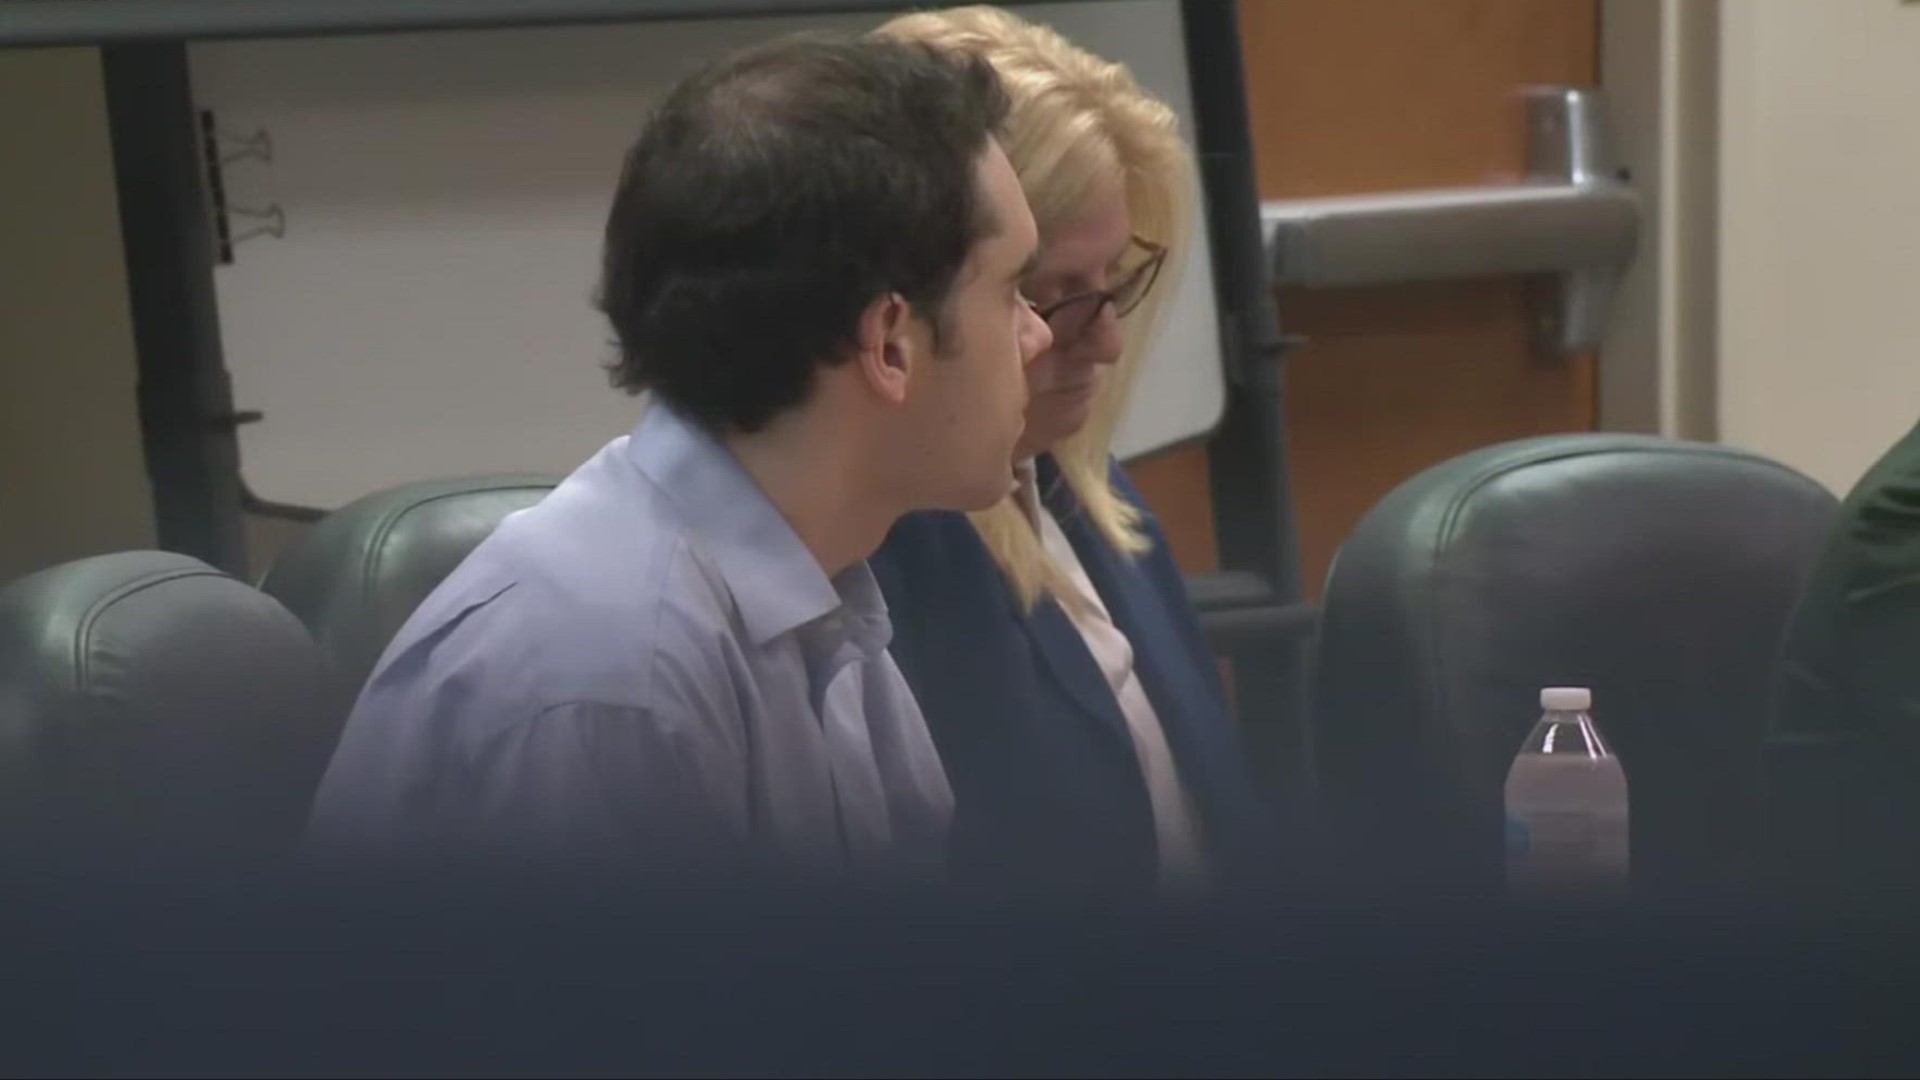 Timothy Banowetz pleaded guilty to first-degree murder and two other counts Tuesday morning as the trial was about to get underway